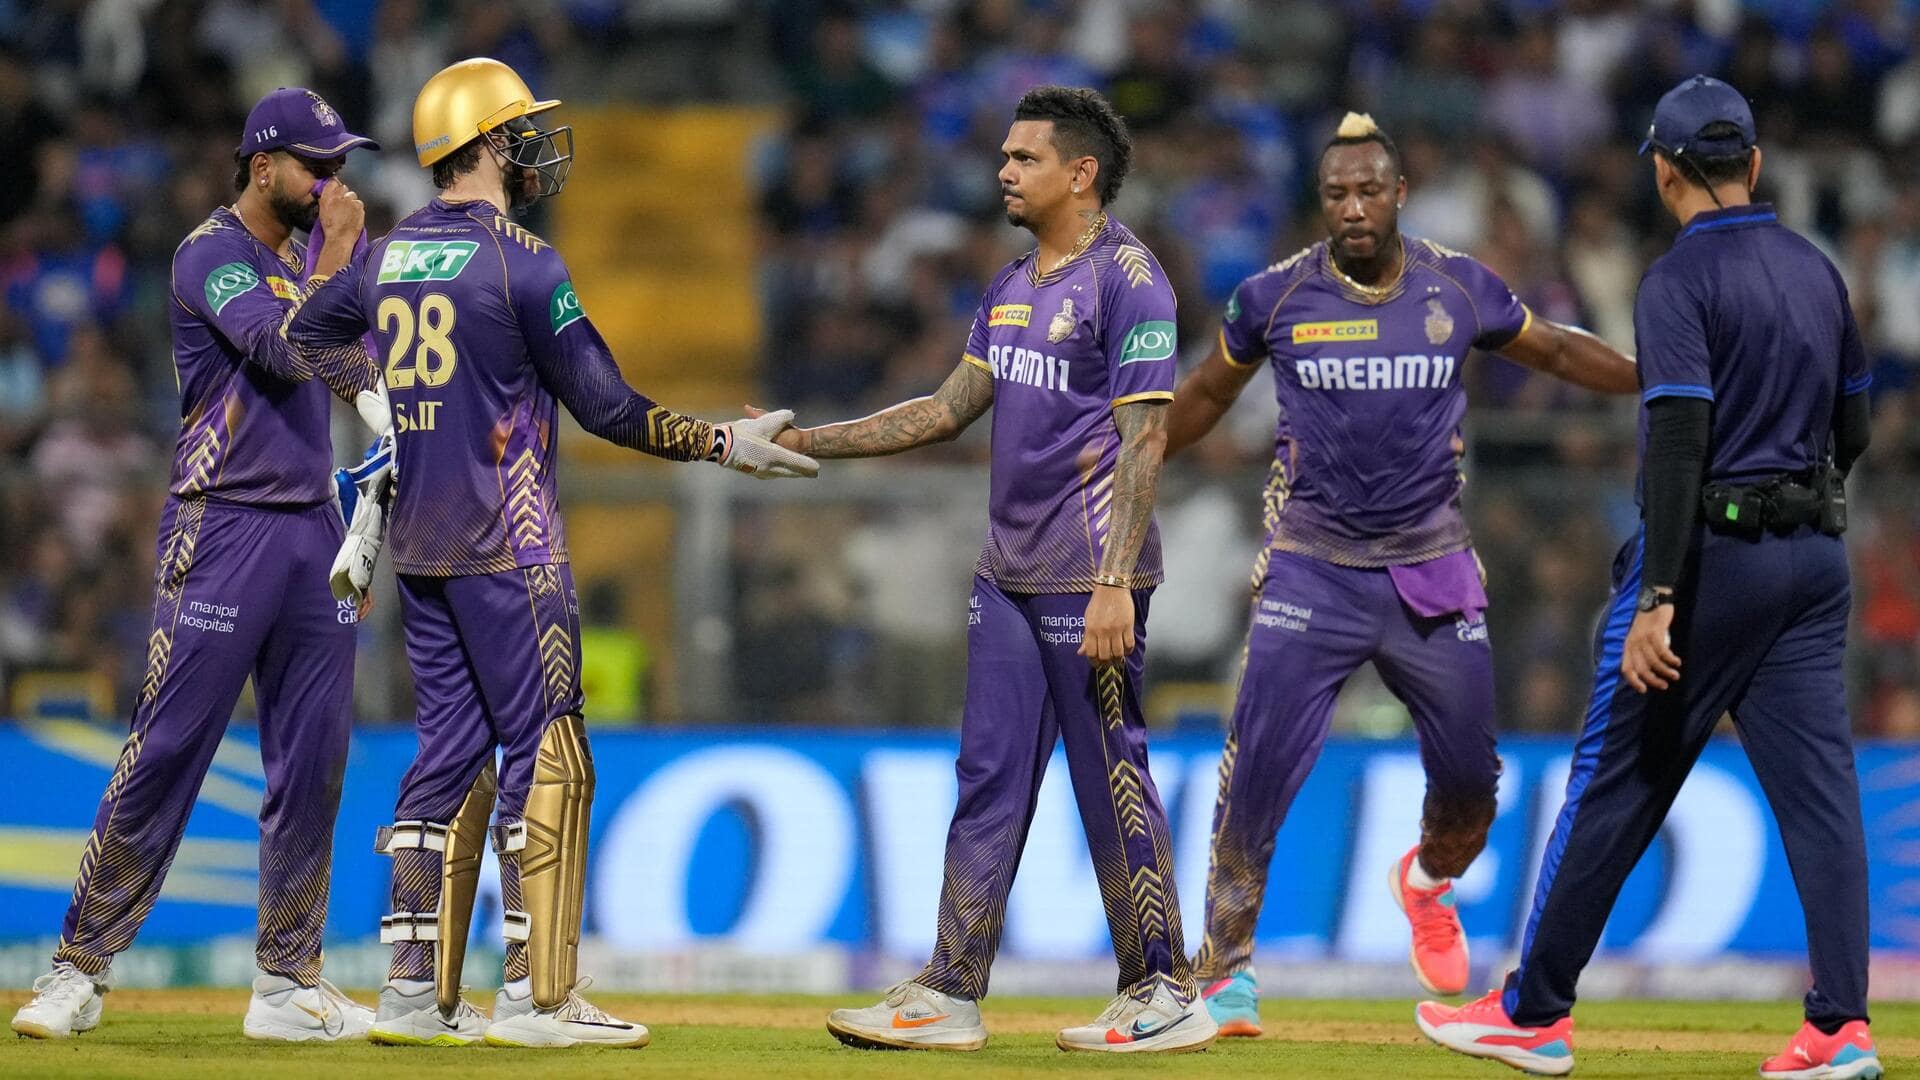 Sunil Narine completes 550 wickets in T20 cricket: Decoding stats